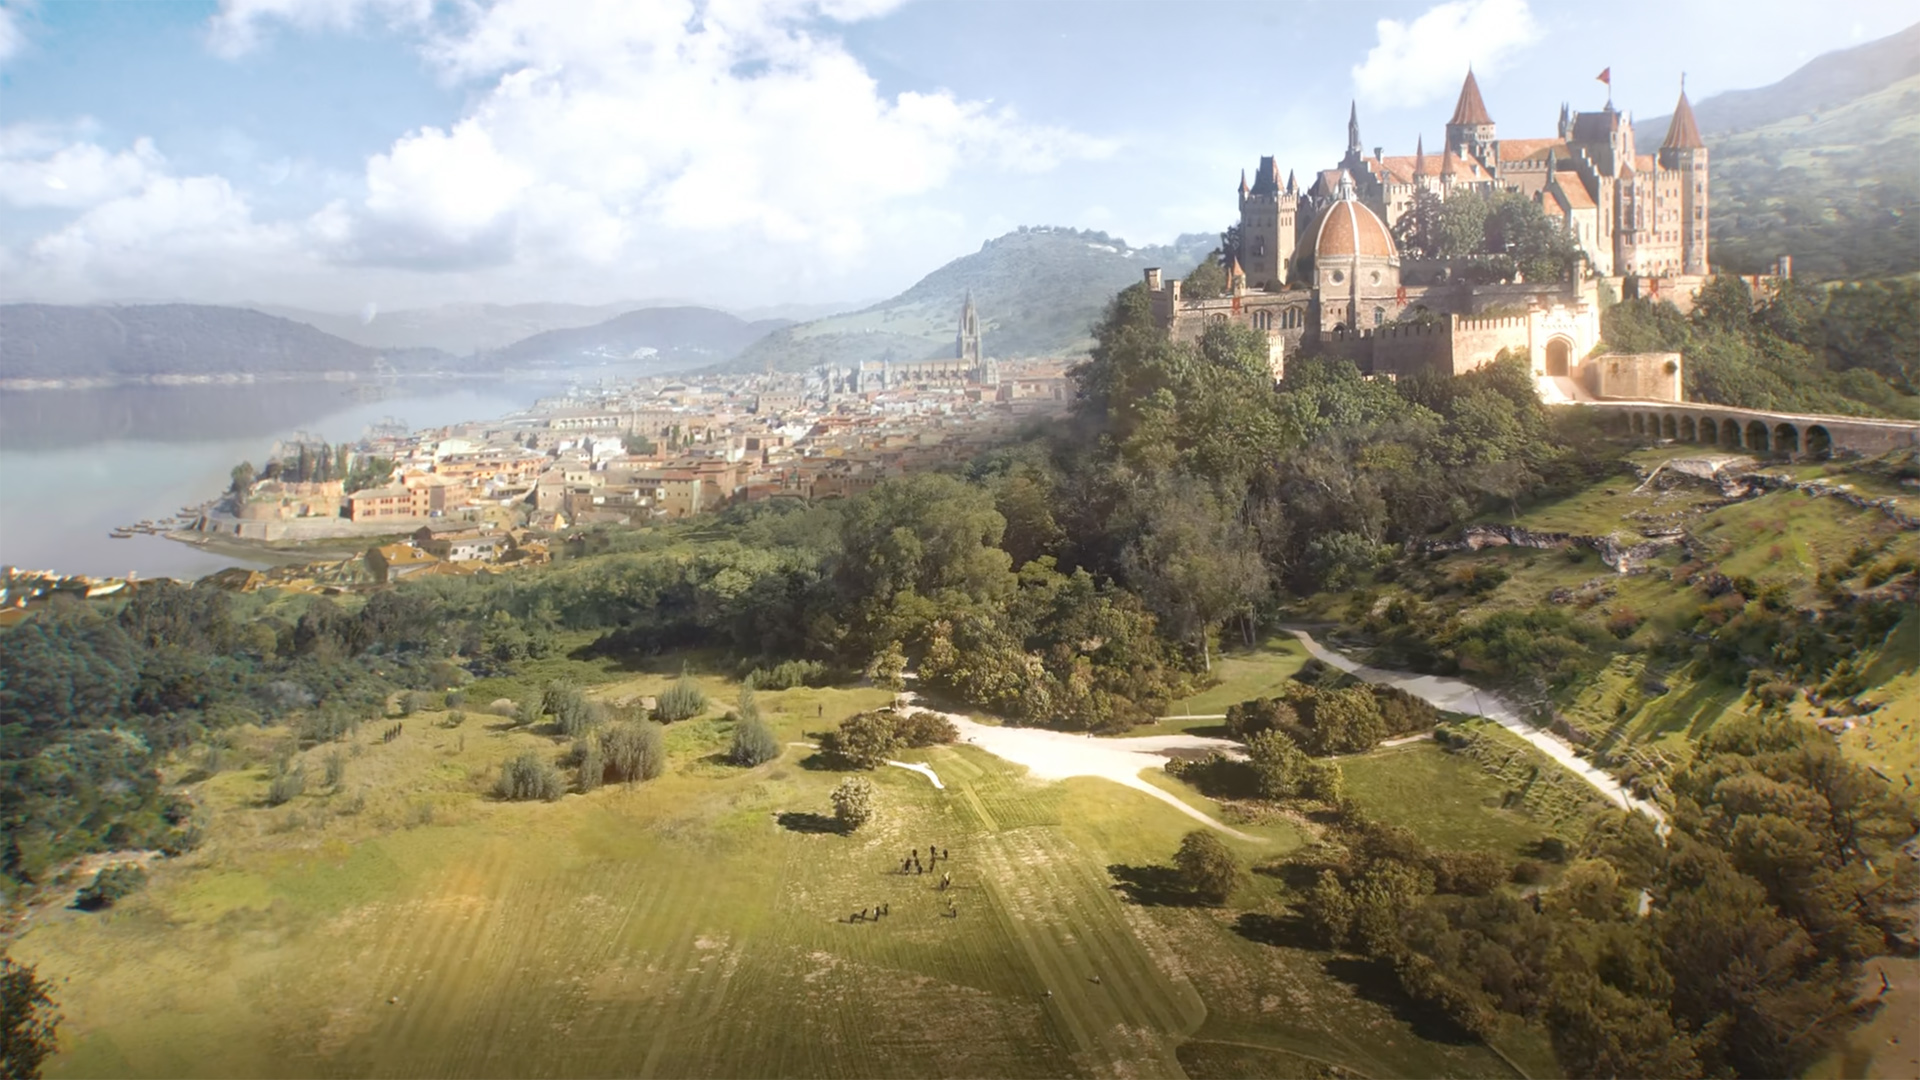 360 virtual environment showing fantasy castle on hilly forest landscape